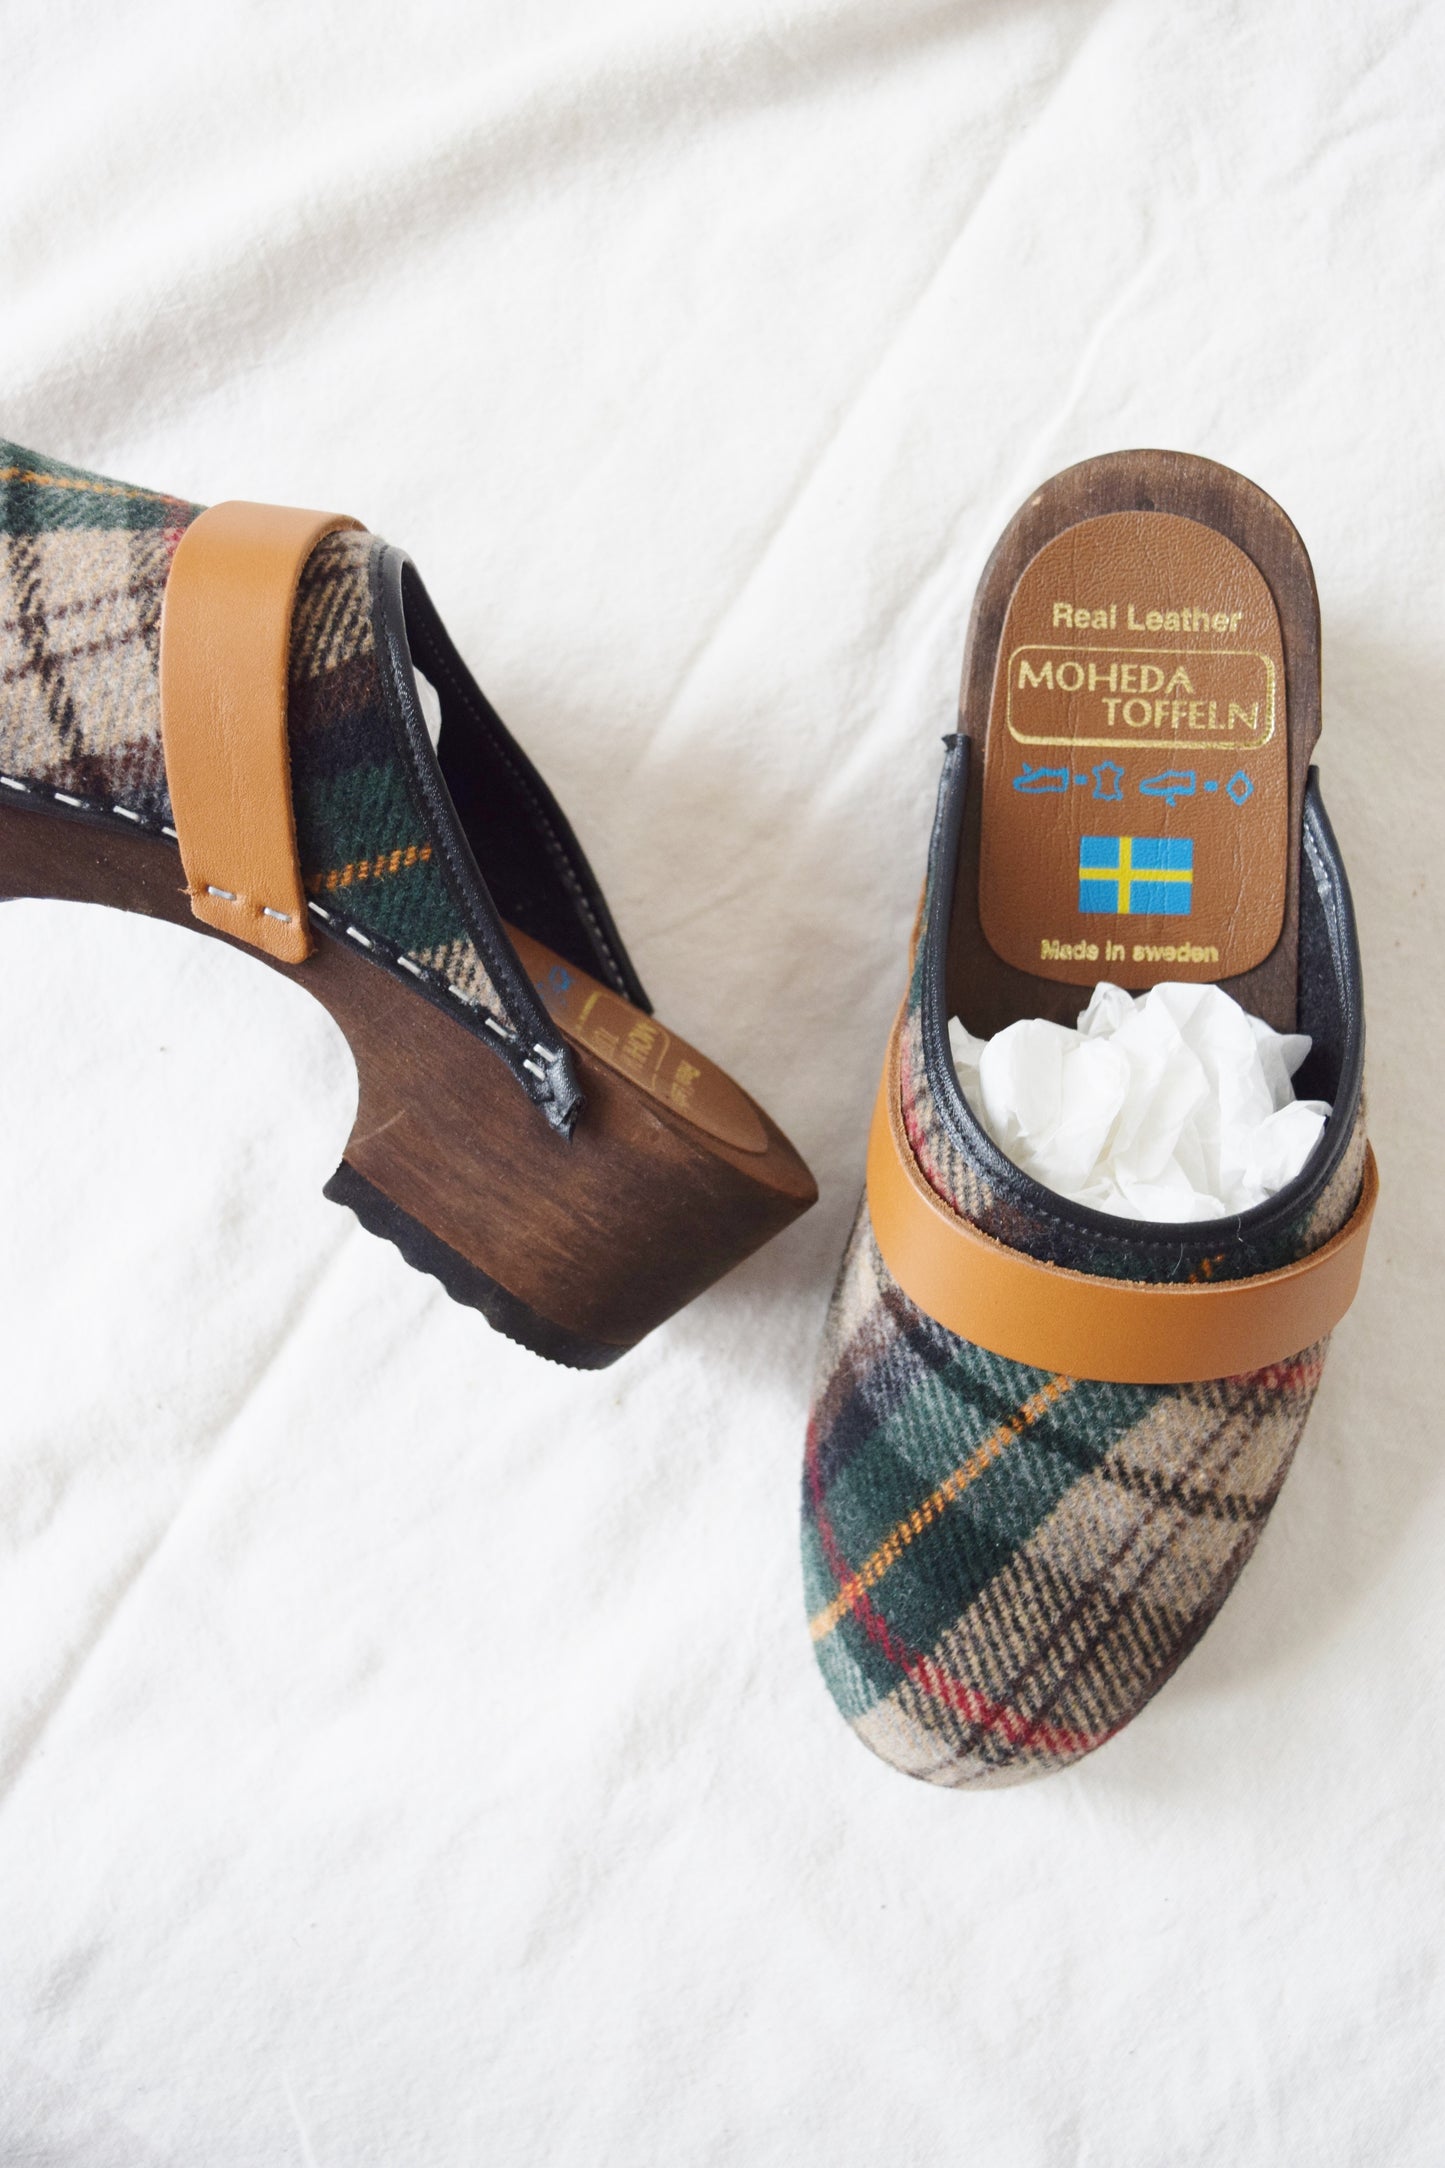 Classic Swedish Clogs in Fall Plaid by Moheda Toffeln | US 6.5 (EU 37, UK 4.5)